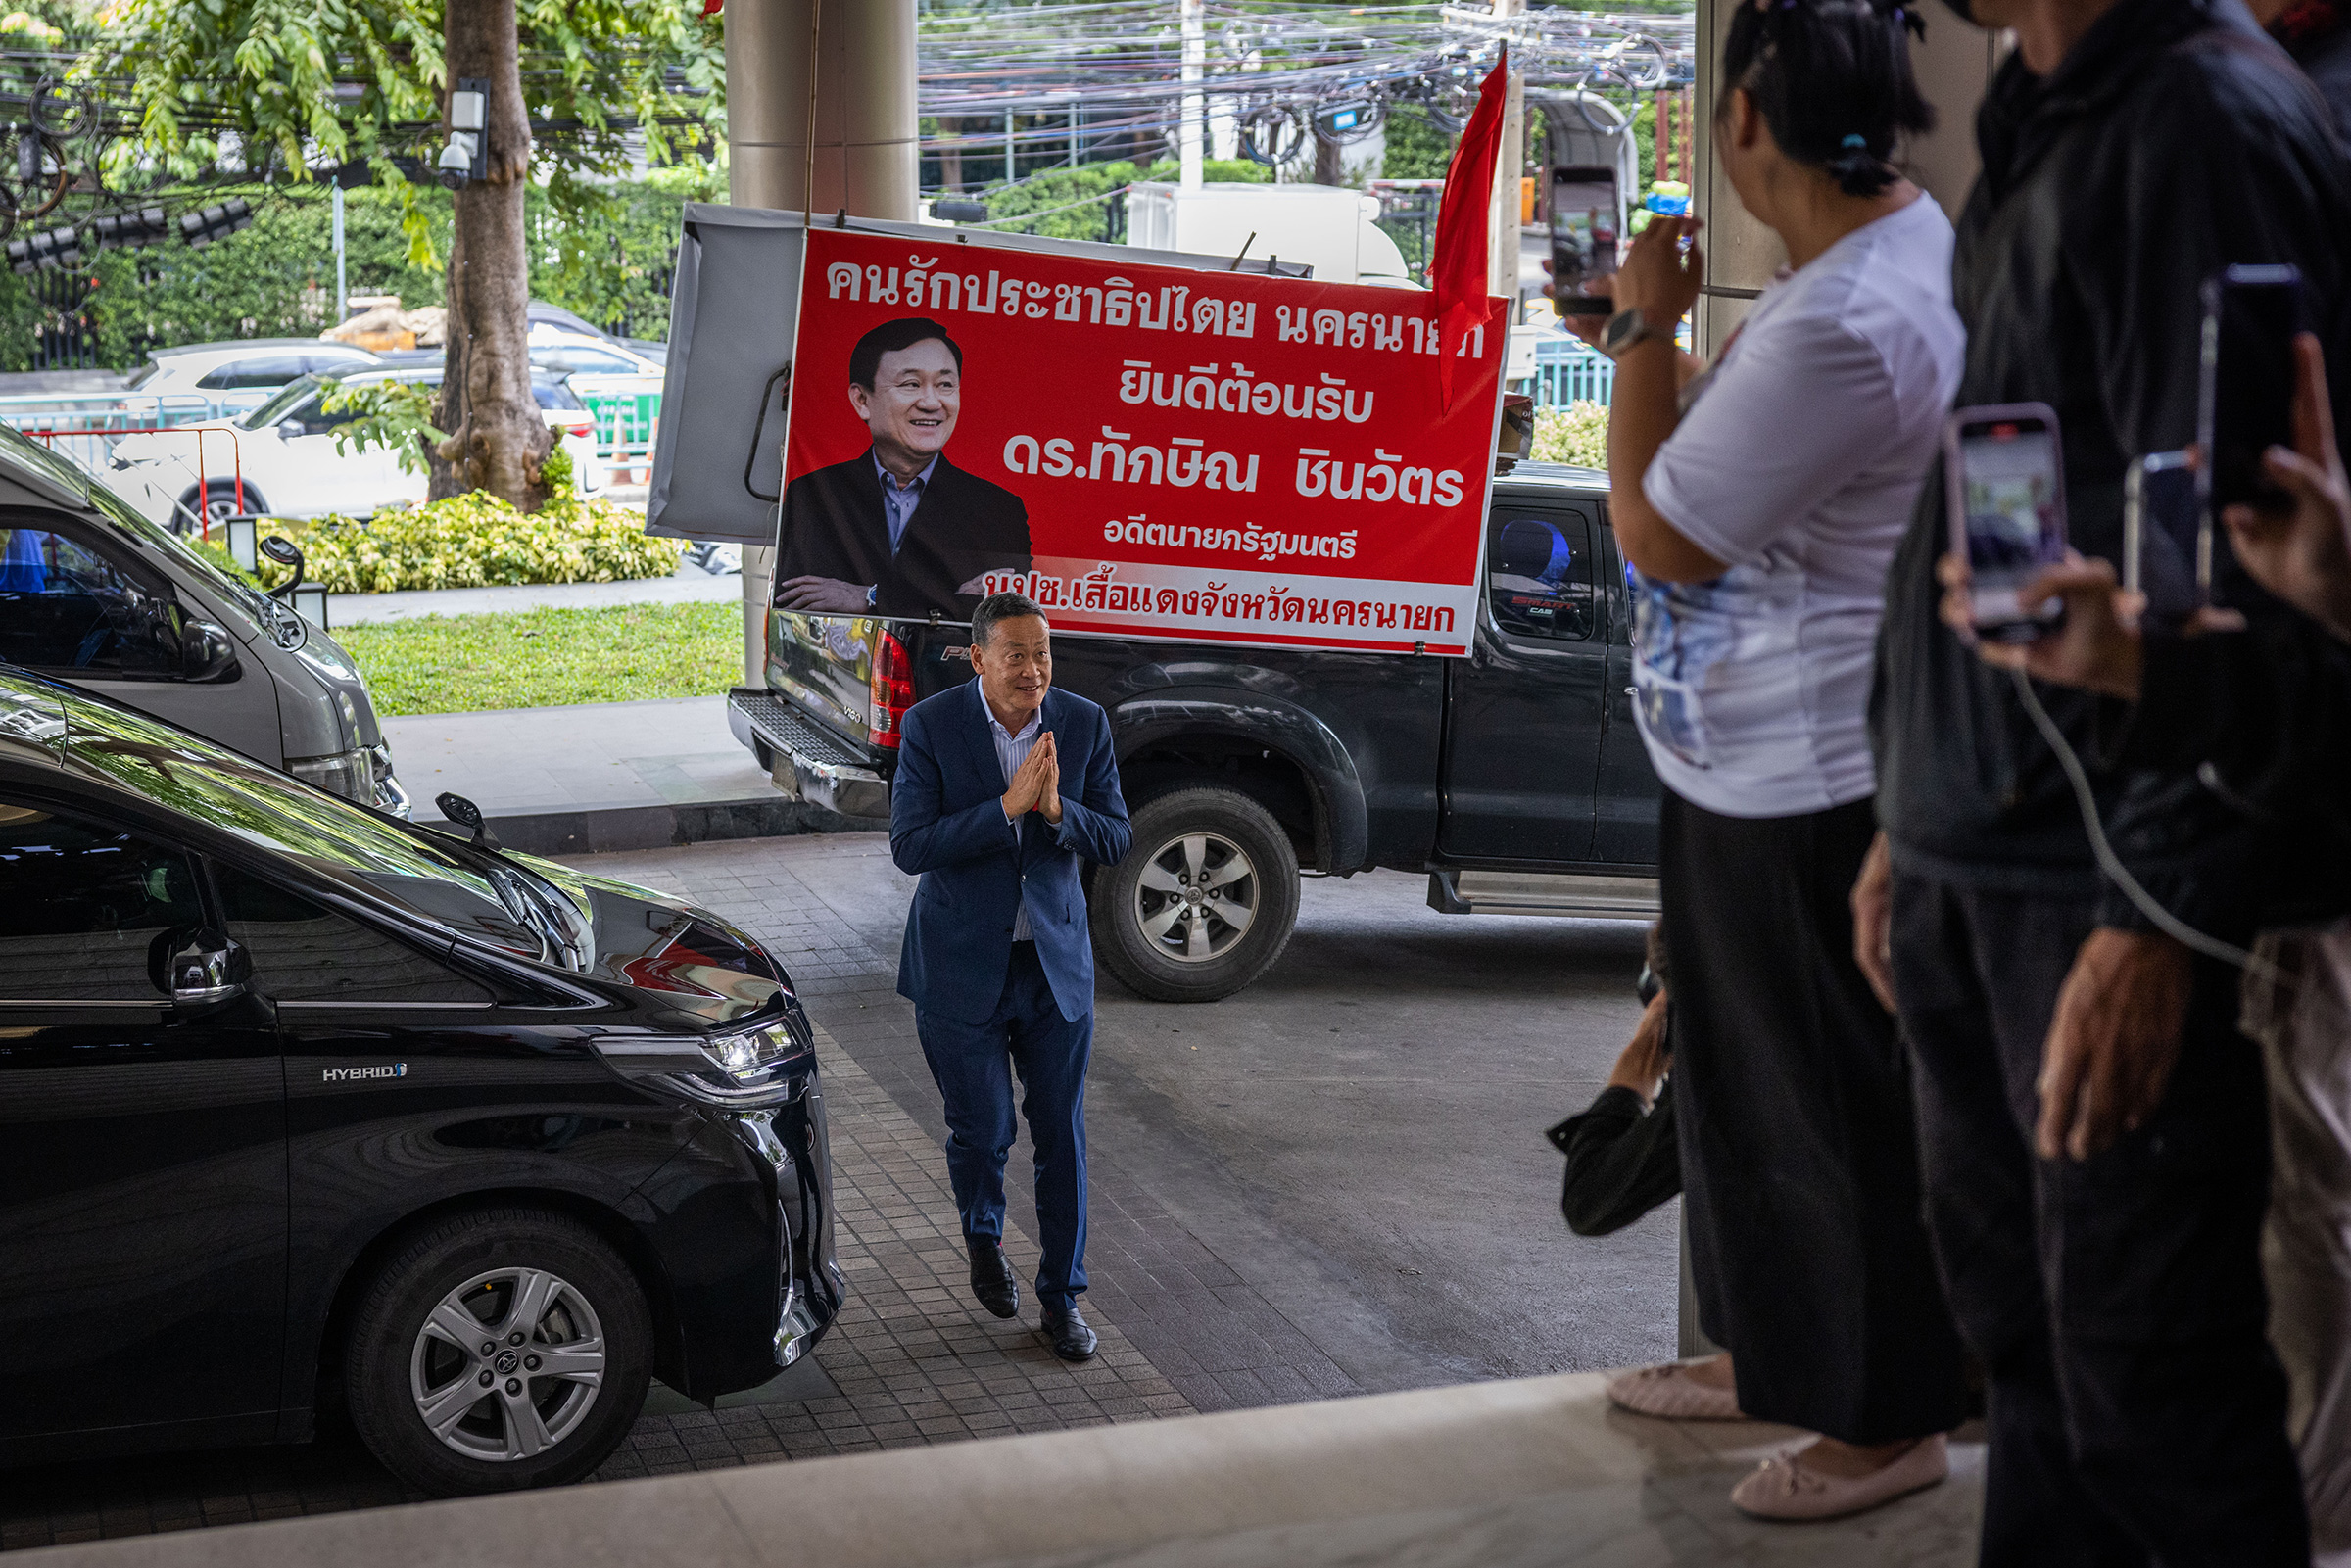 Srettha Thavisin greets supporters in front of an image of former Thai Prime Minister Thaksin Shinawatra as he arrives at Pheu Thai Party's headquarters on Aug. 22 in Bangkok.